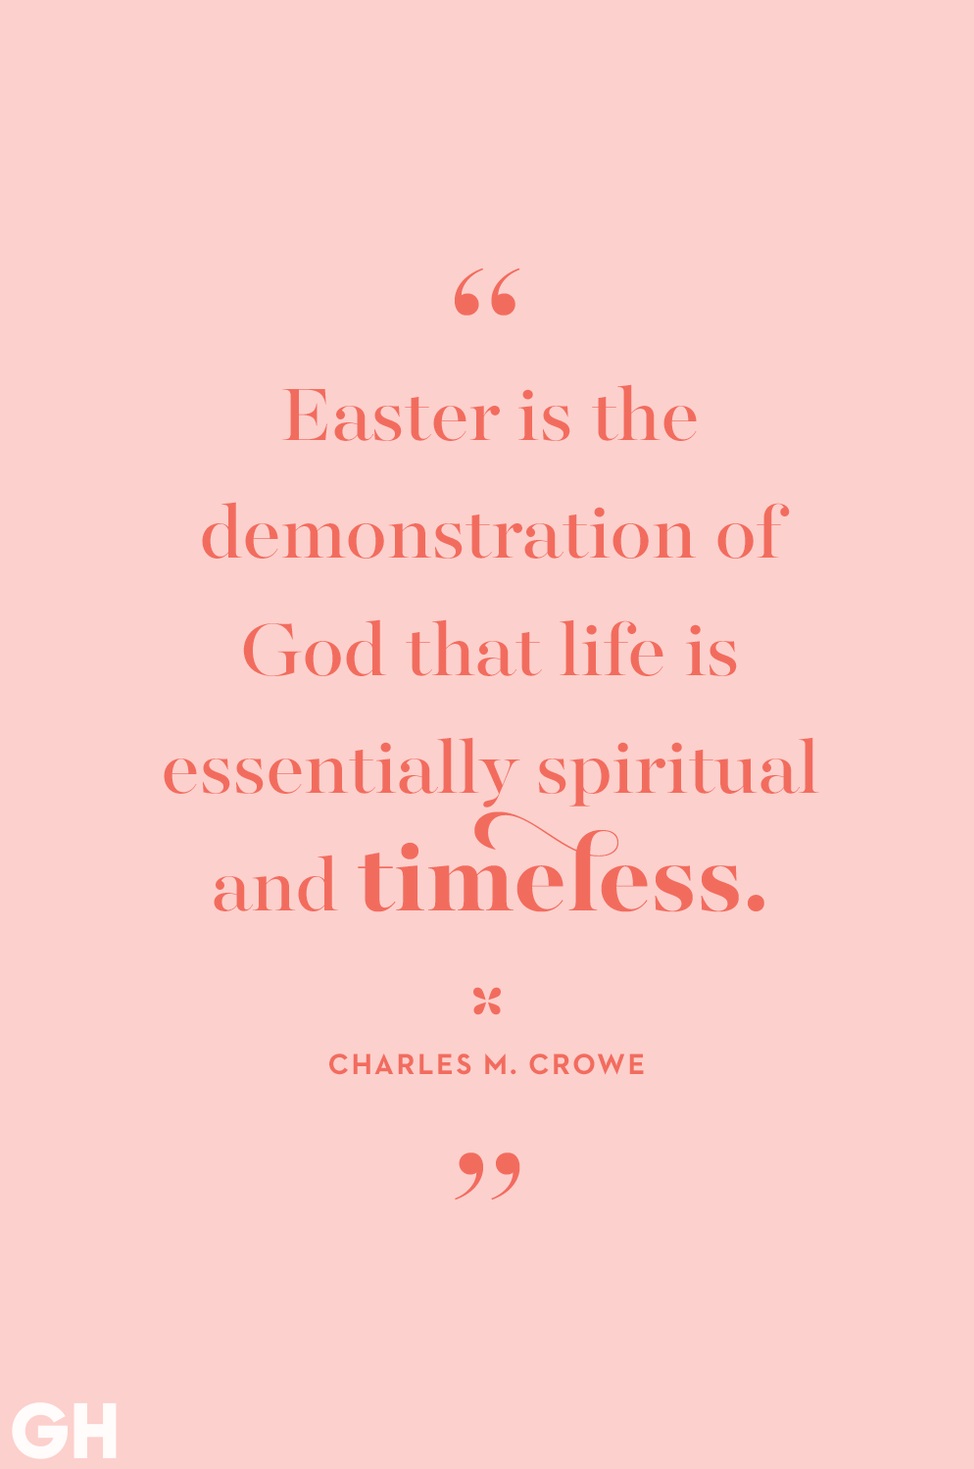 Easter is the demonstration of God that life is essentially spiritual and timeless- Charles M. Crowe.